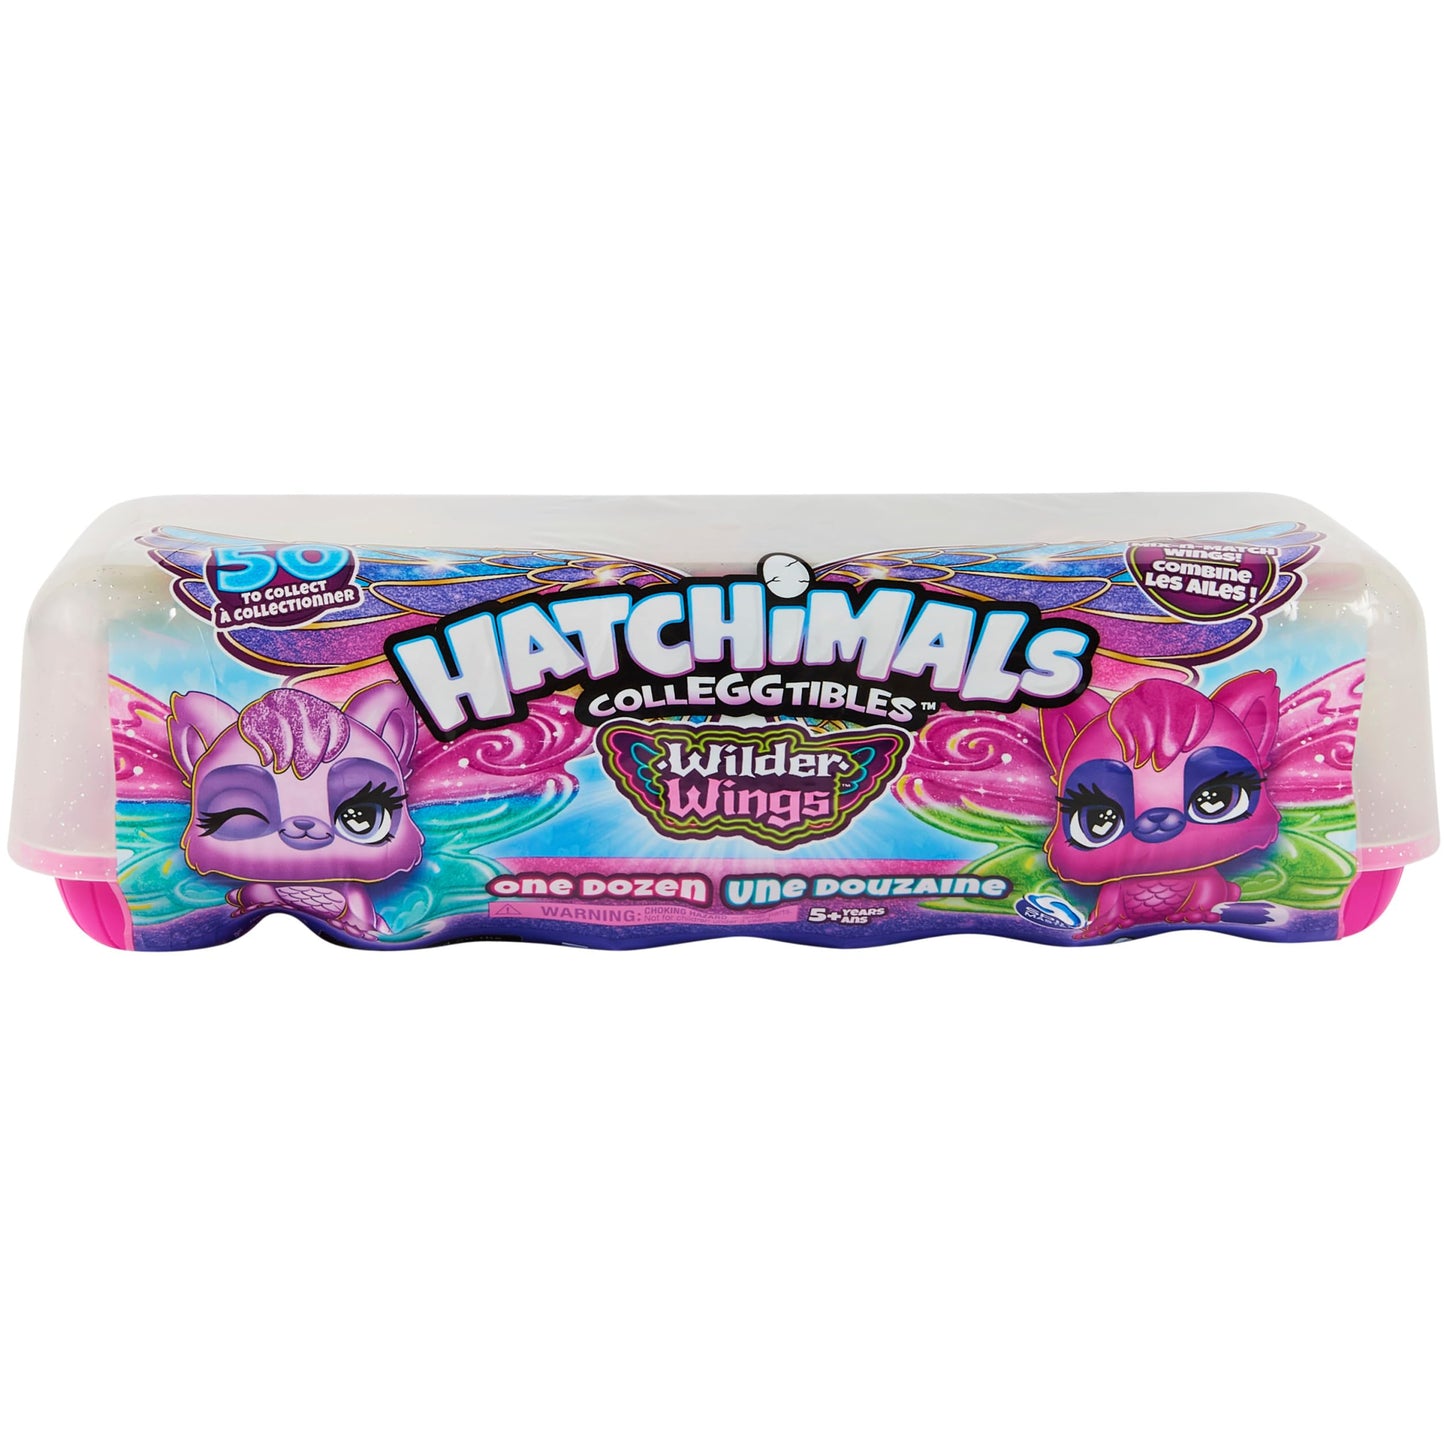 Hatchimals Alive, Easter Eggs Carton Toy with 5 Mini Figures in Self-Hatching Eggs, 11 Accessories, Easter Basket Stuffers for Girls & Boys Ages 3+